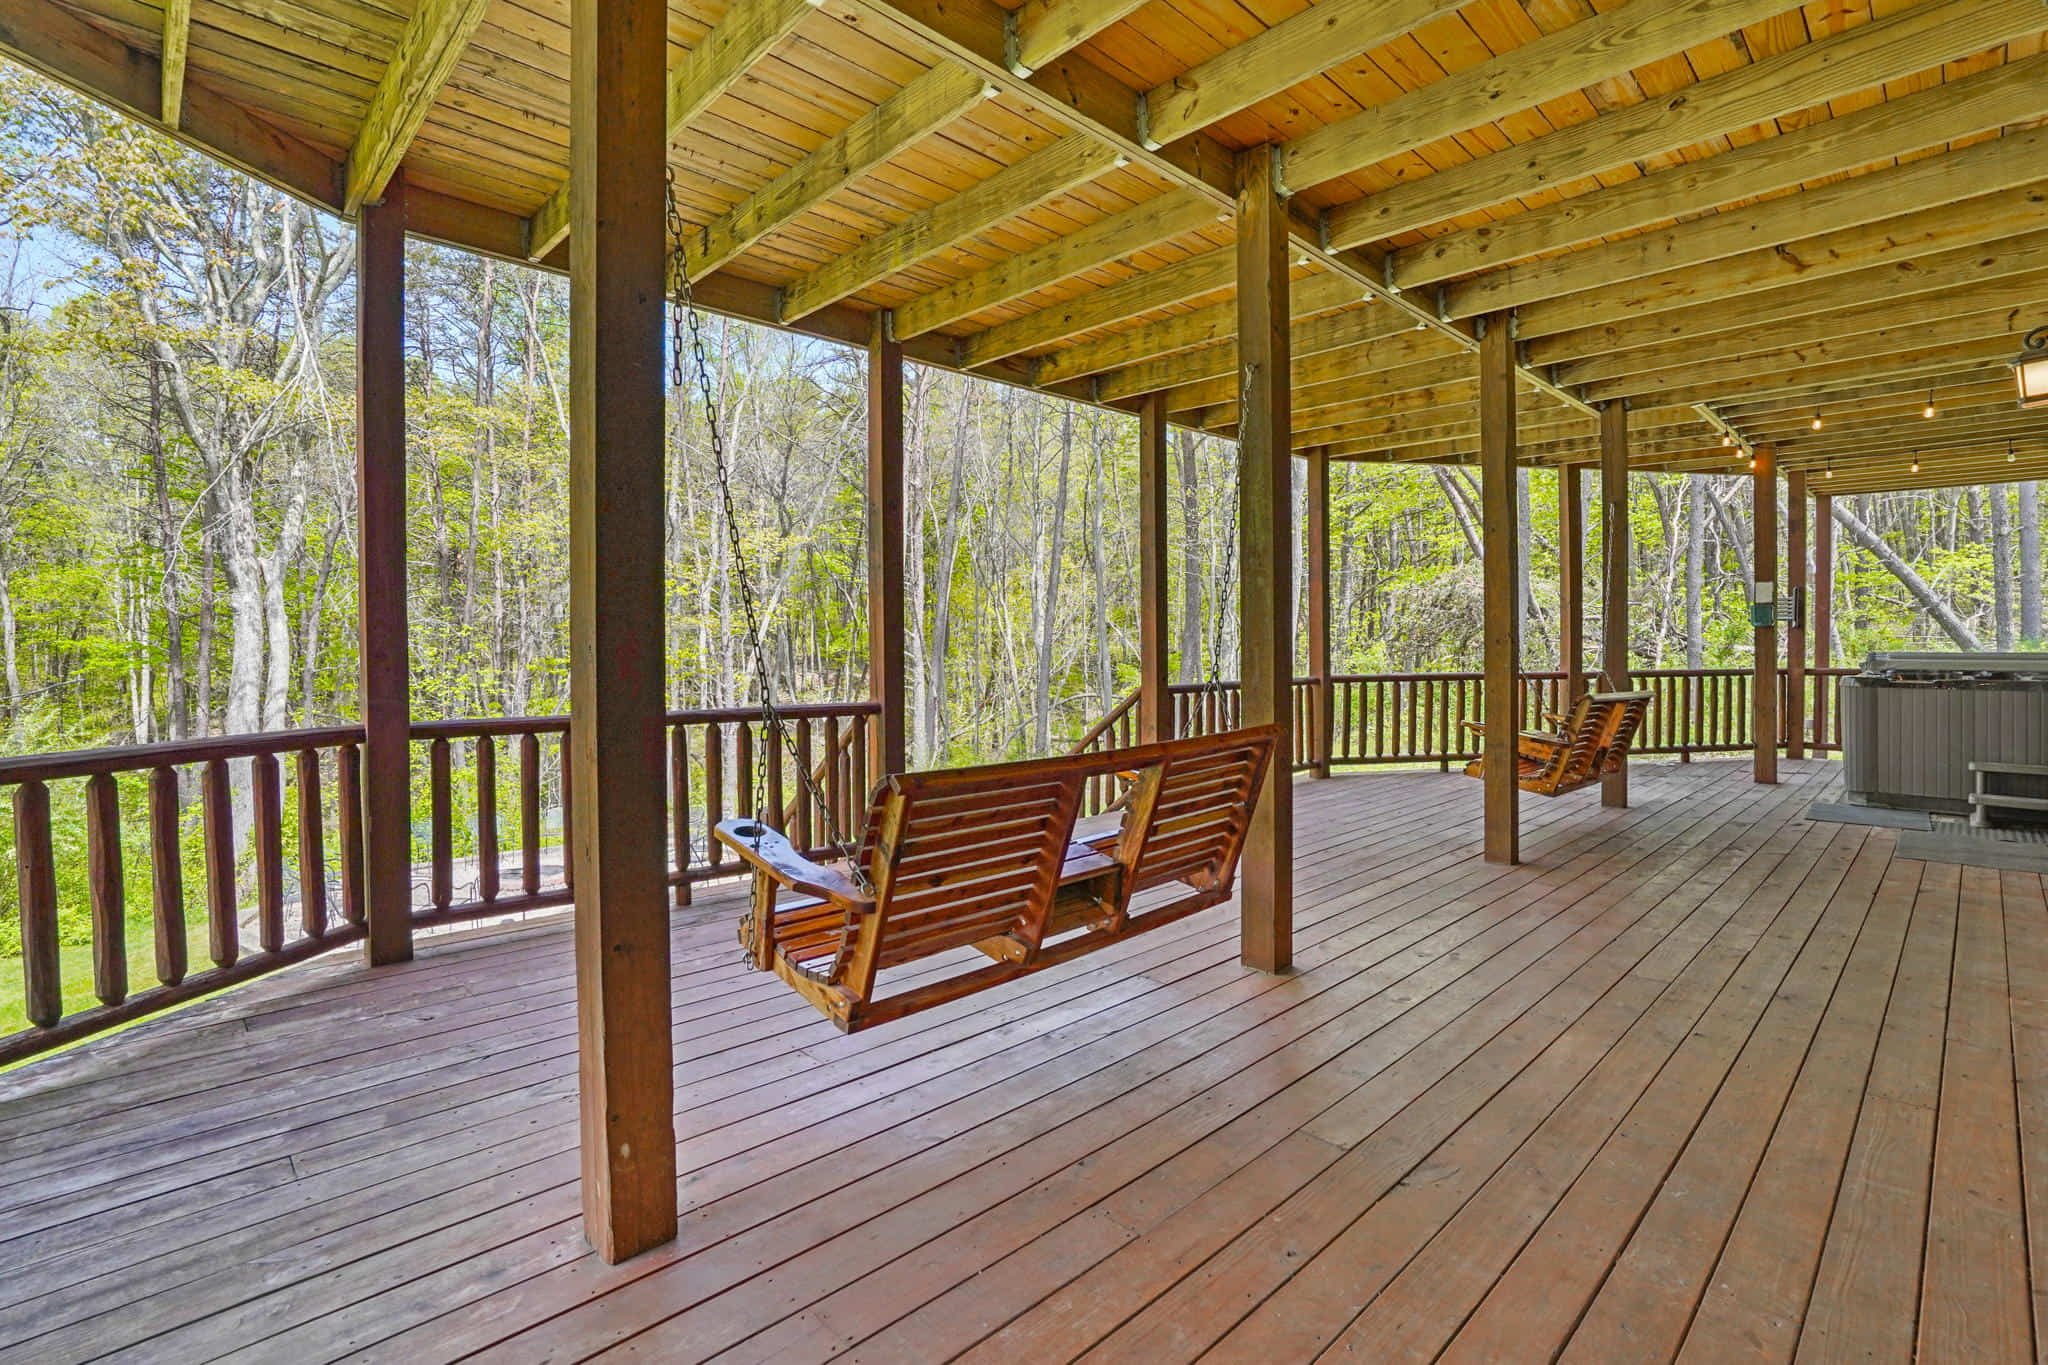 Porch Swings in River Rock Lodge in Hocking Hills Ohio